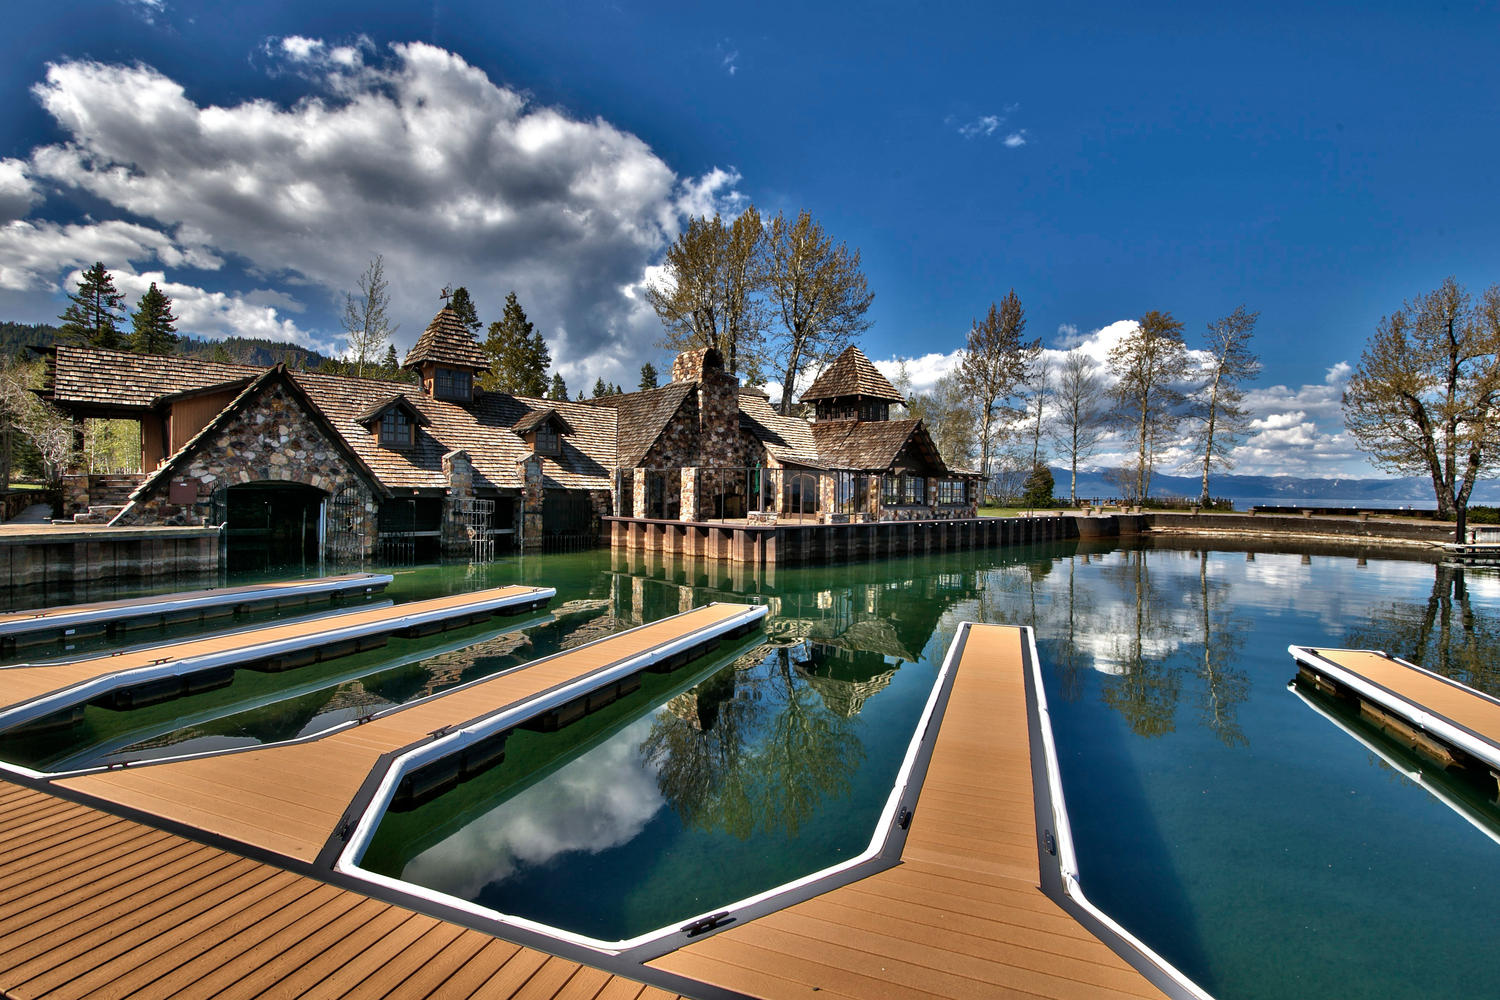 Lake Tahoe estate featured in 'Godfather' movie listed for $3.75 million - seattlepi.com1500 x 1000